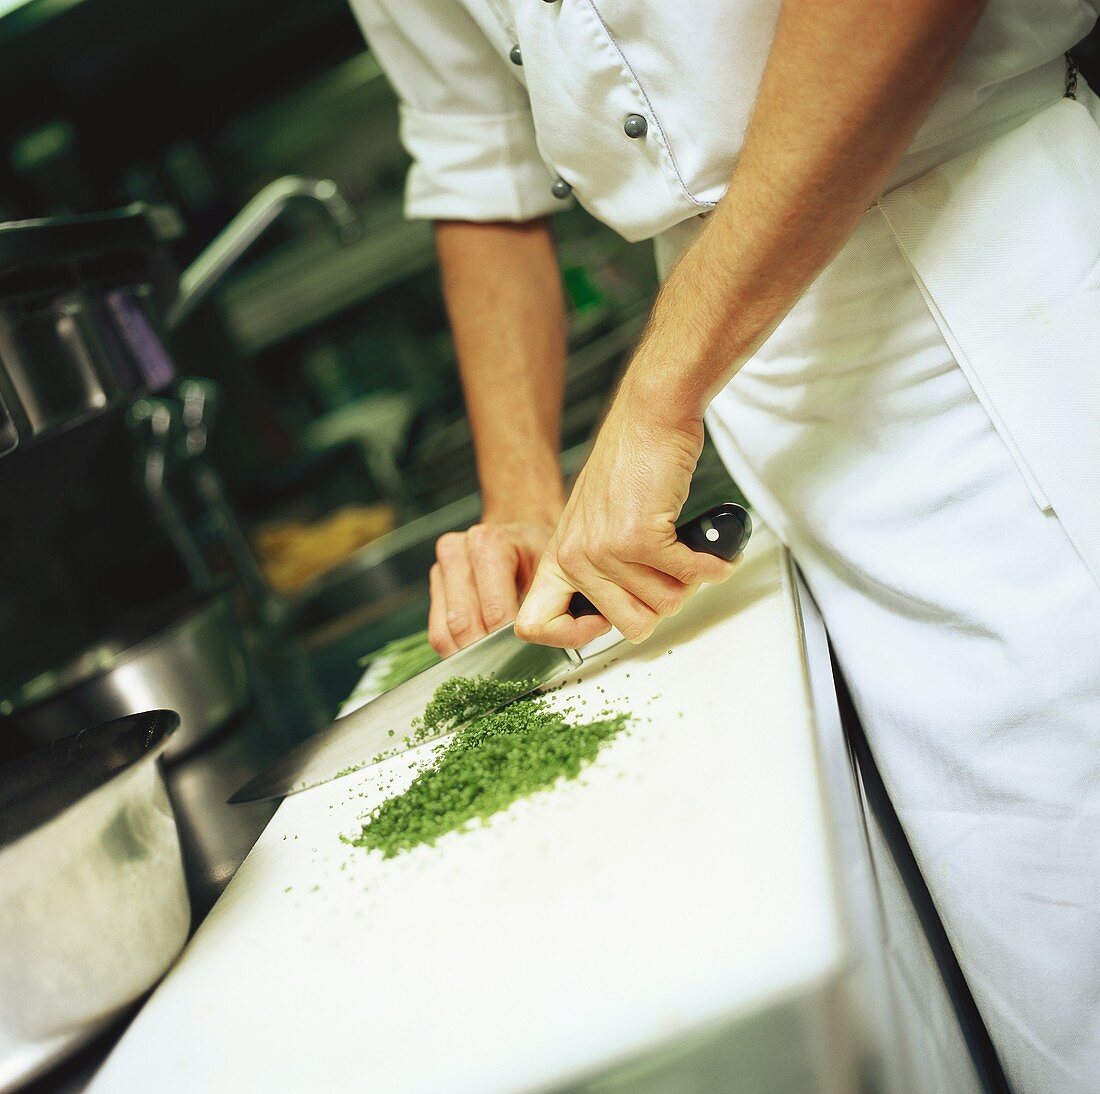 Chef chopping herbs in a kitchen